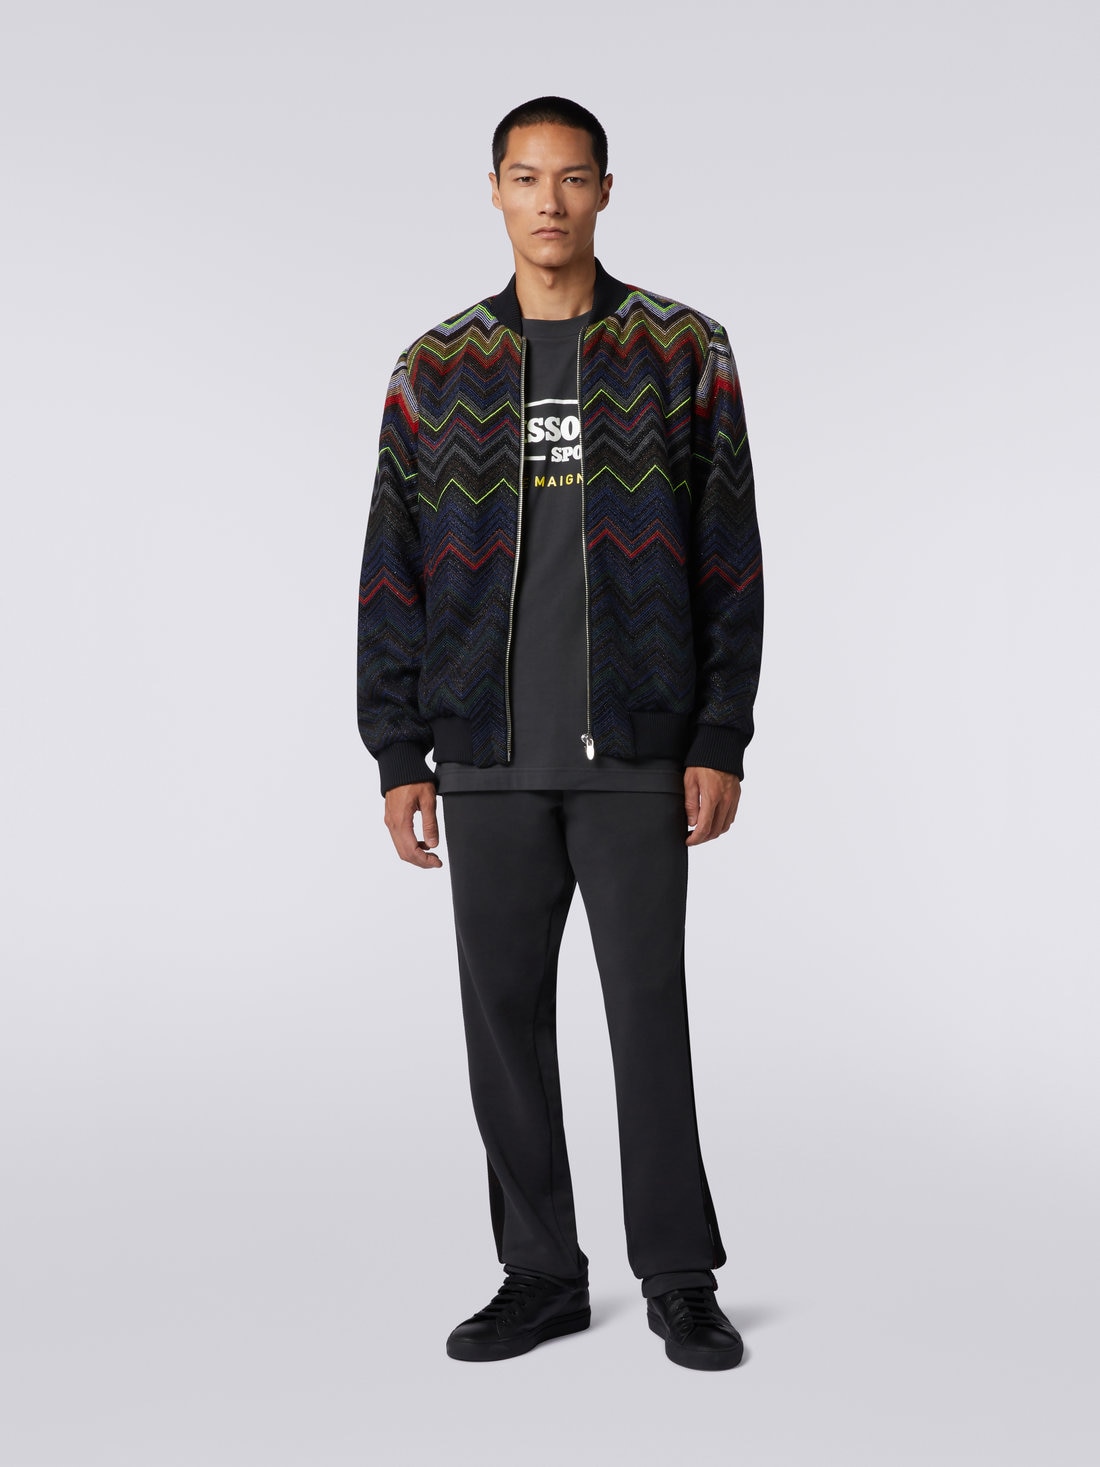 Wool and cotton blend chevron bomber jacket in collaboration with Mike Maignan, Multicoloured - TS23SC03BC0040SM950 - 1